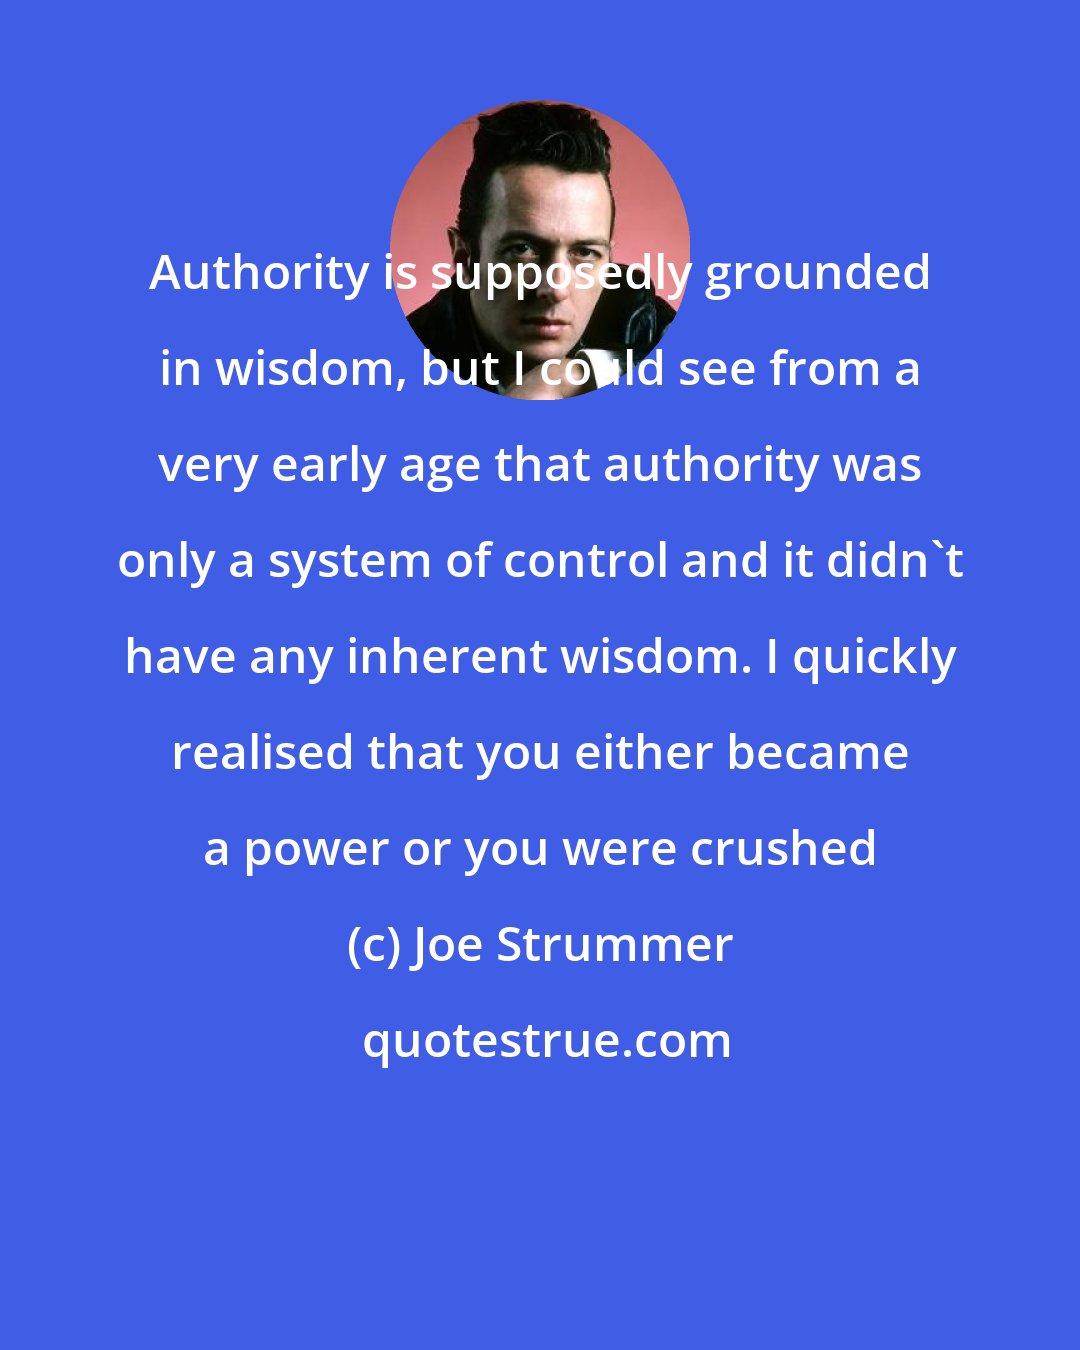 Joe Strummer: Authority is supposedly grounded in wisdom, but I could see from a very early age that authority was only a system of control and it didn't have any inherent wisdom. I quickly realised that you either became a power or you were crushed